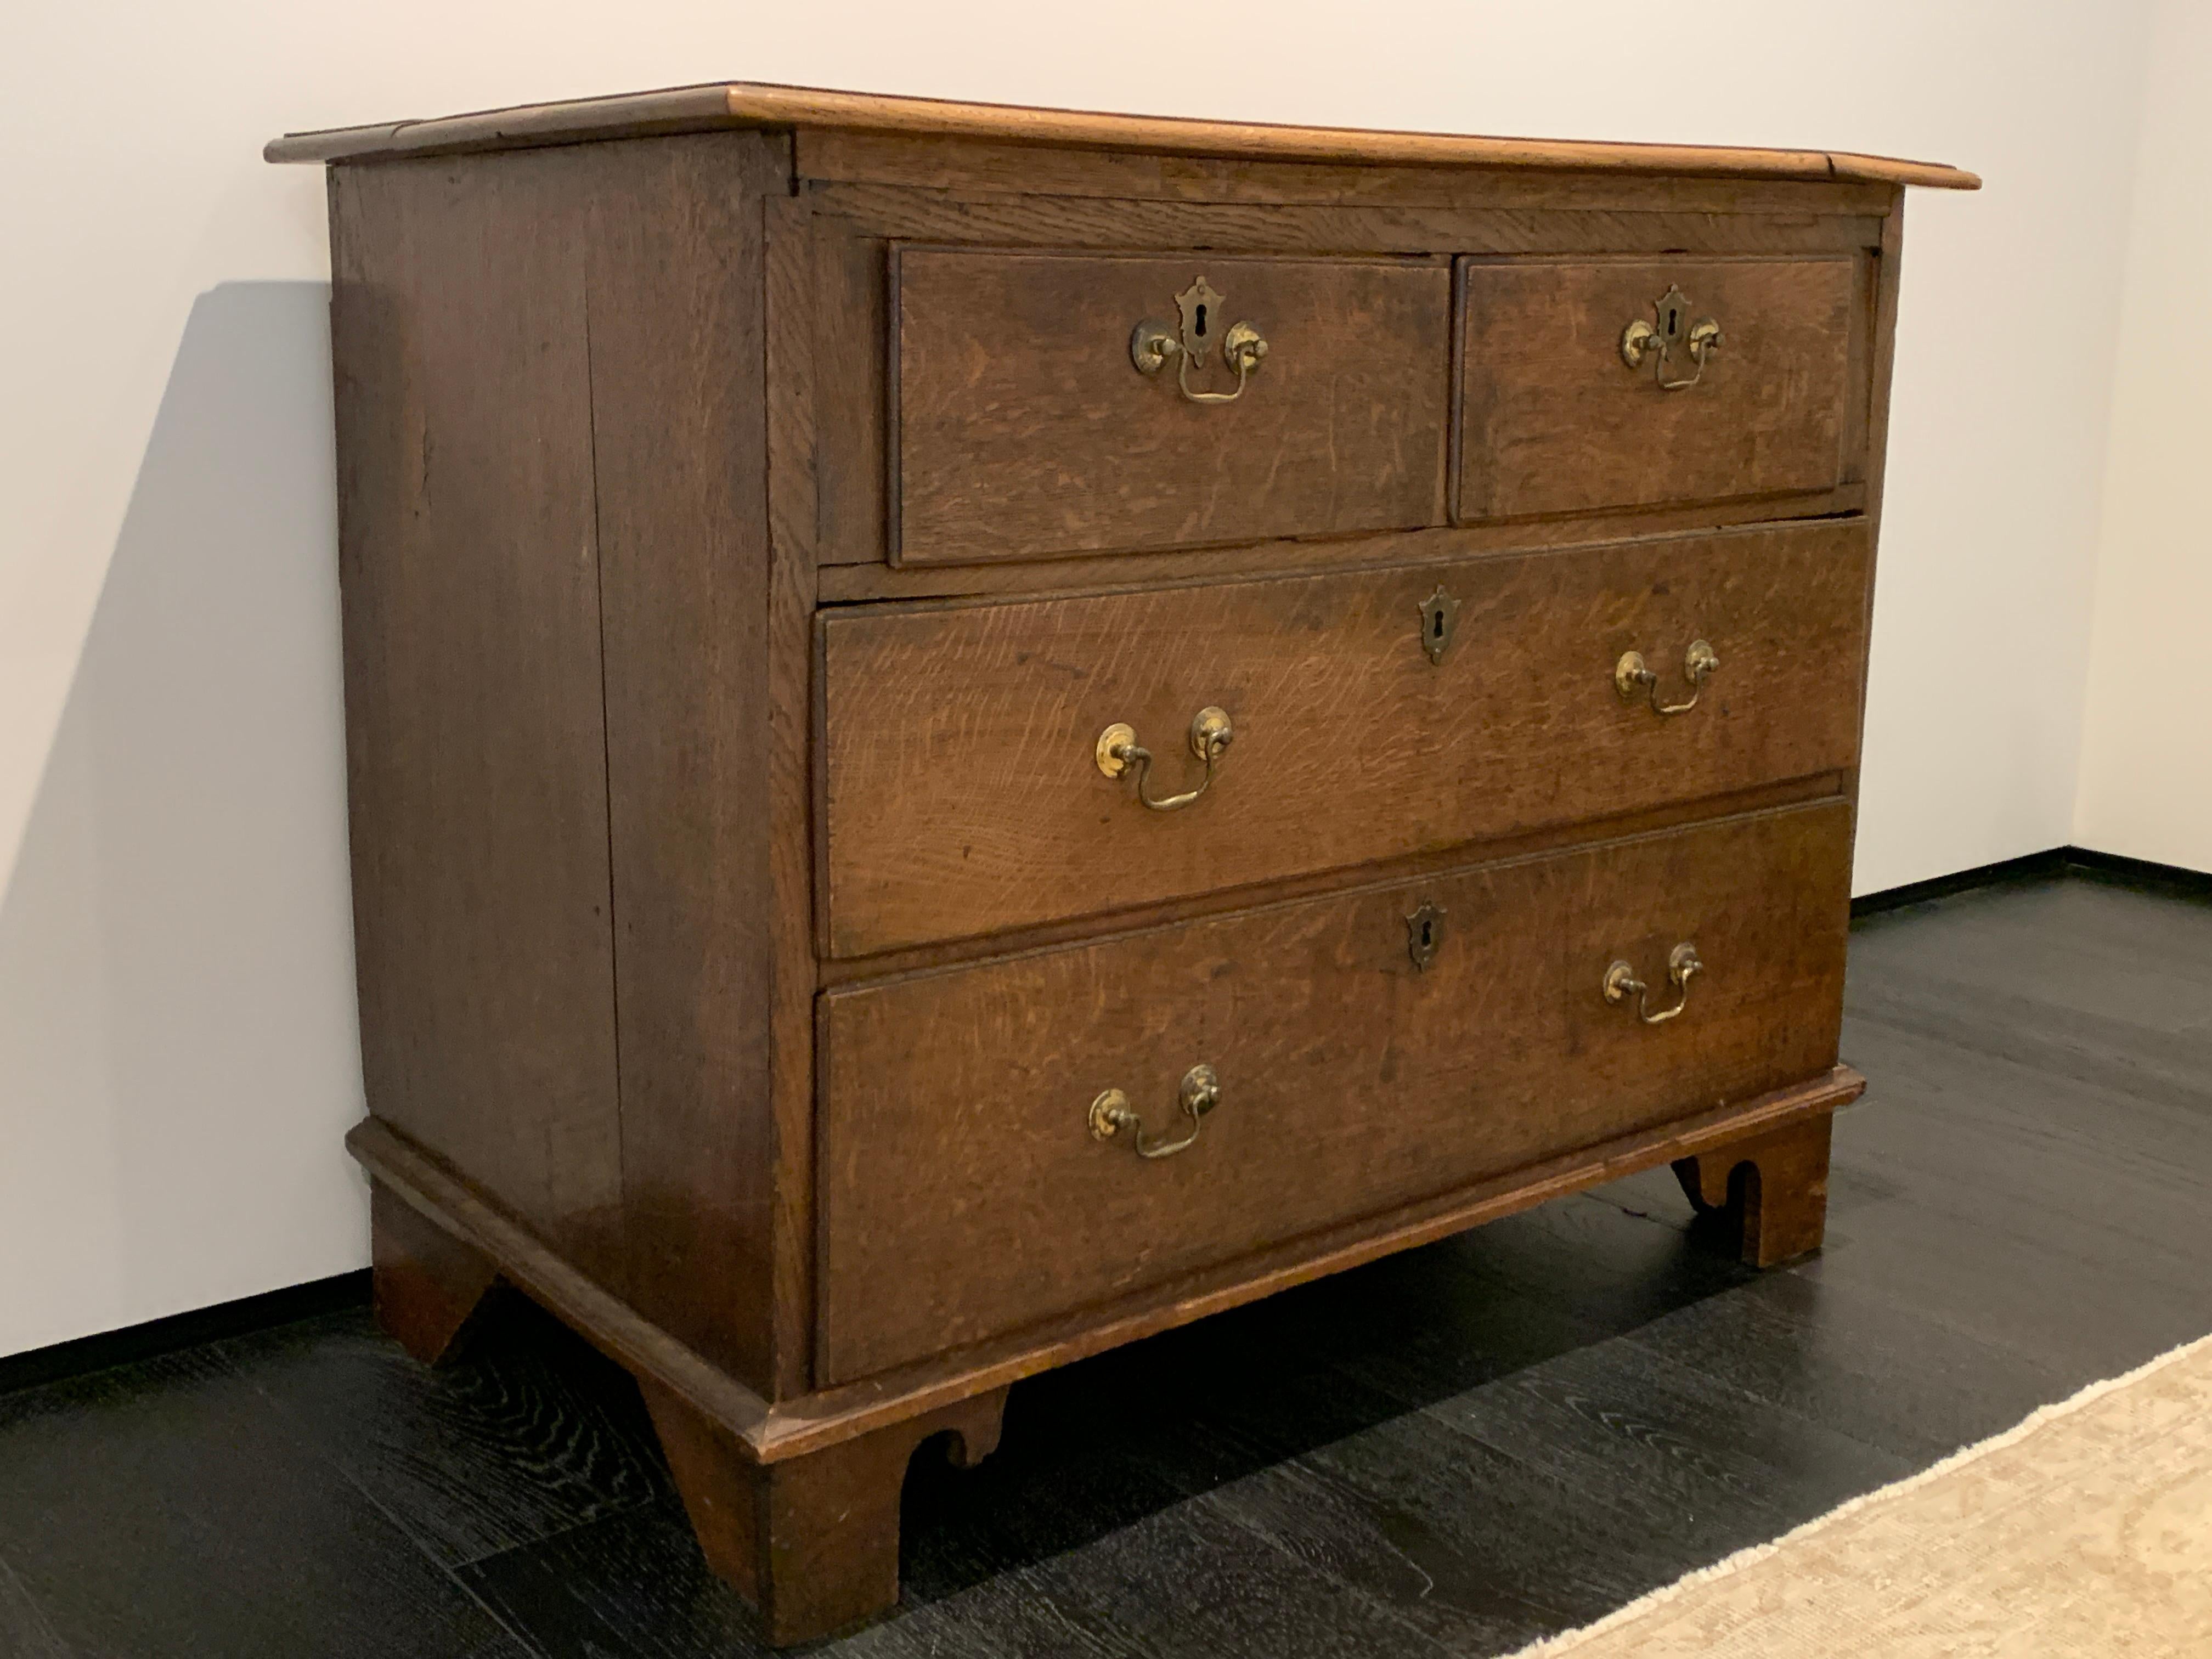 19th century chest of drawers with brass hardware and original finish. Very attractive as side table or dresser with medium brown oak finish.